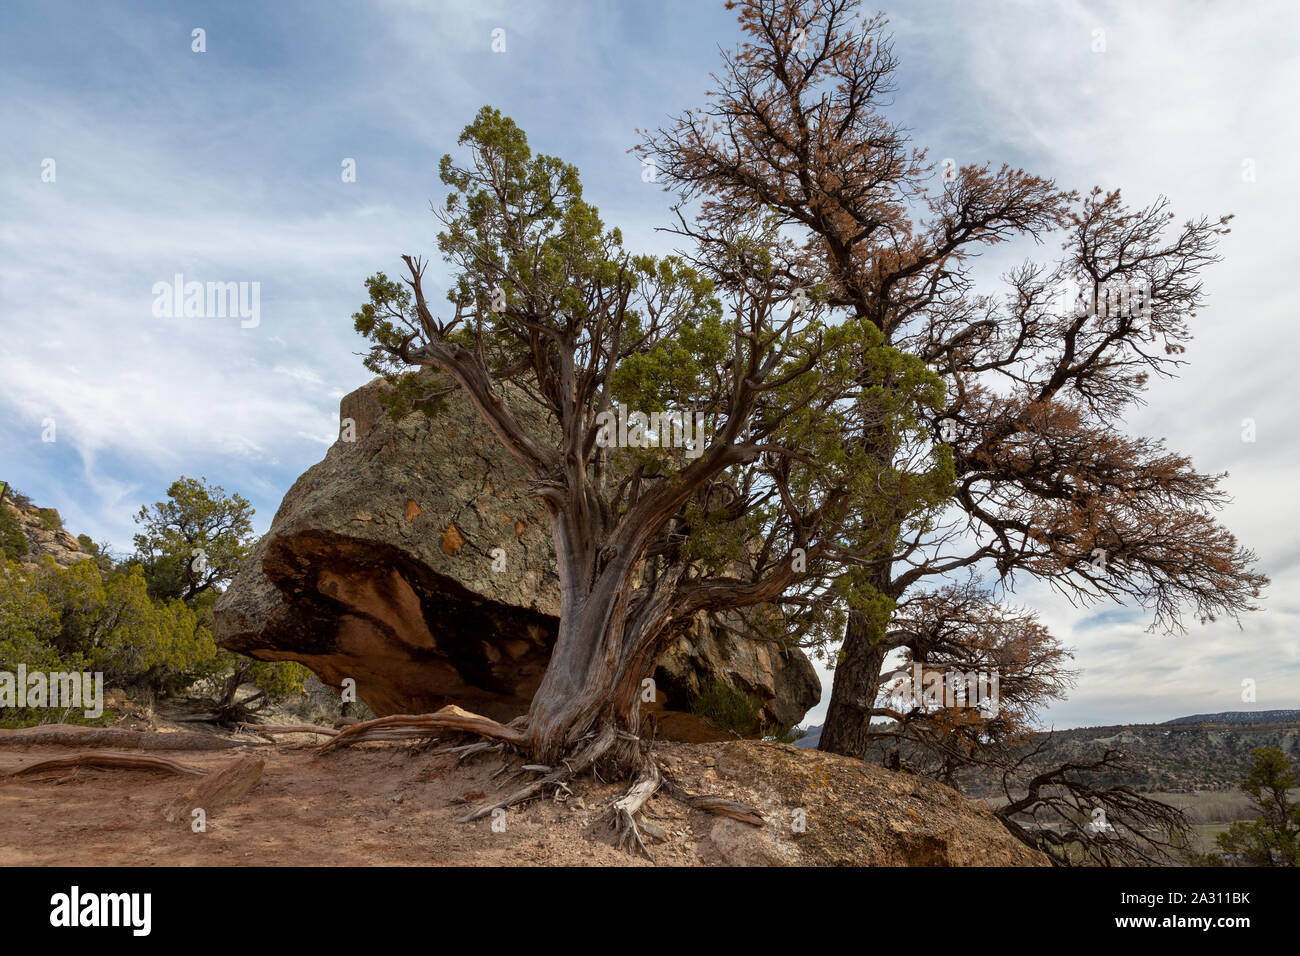 A juniper tree growing from beneath a large boulder hanging on a ledge.  Escalante Petrified Forest State Park, Utah Stock Photo - Alamy